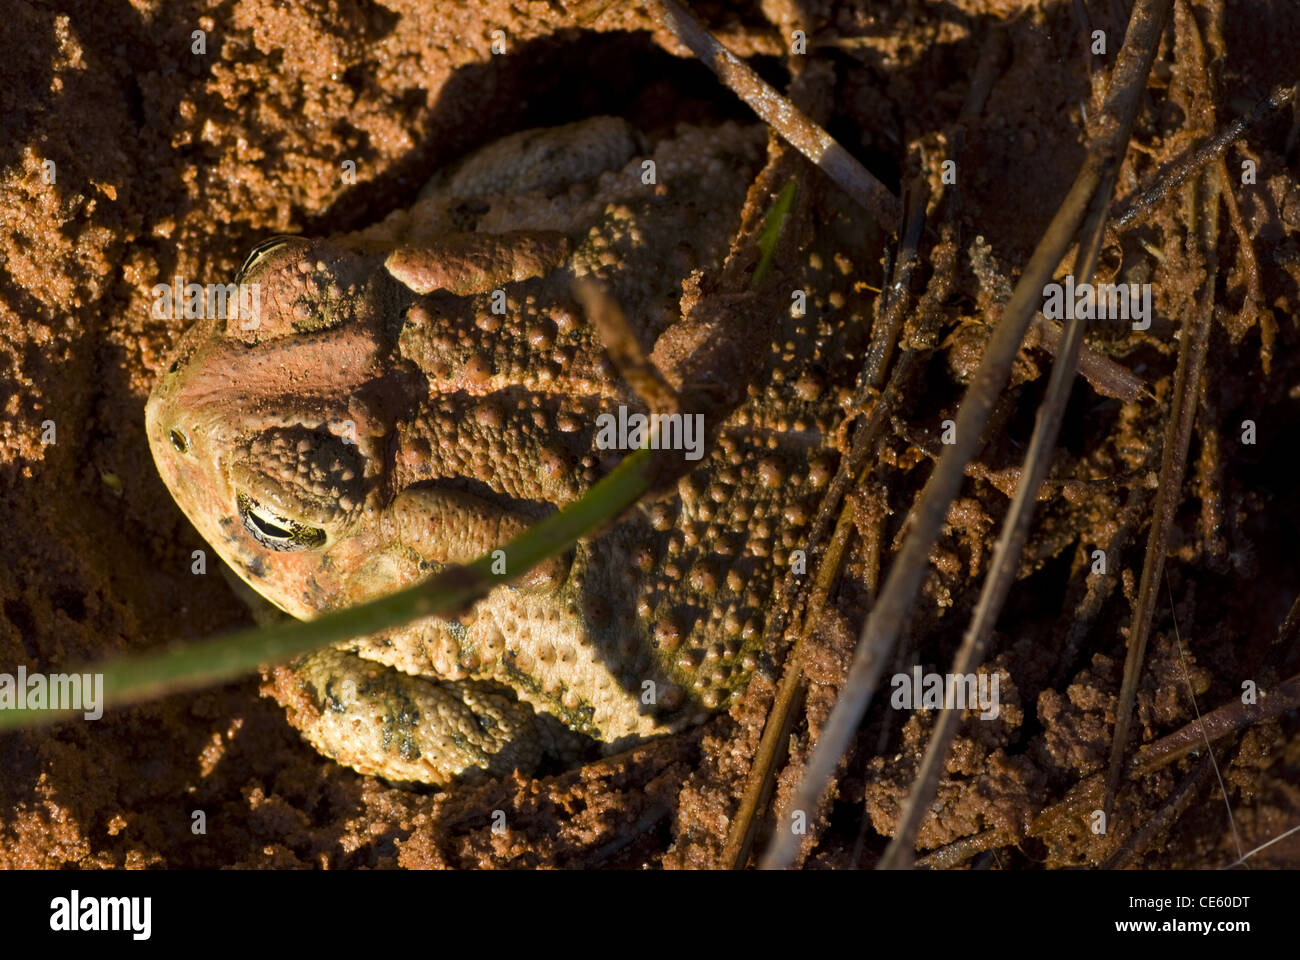 Grabende Woodhouse Kröte, (Anaxyrus Woodhouseii), Little Red River, State Caprock Canyons Park, Texas, USA. Stockfoto